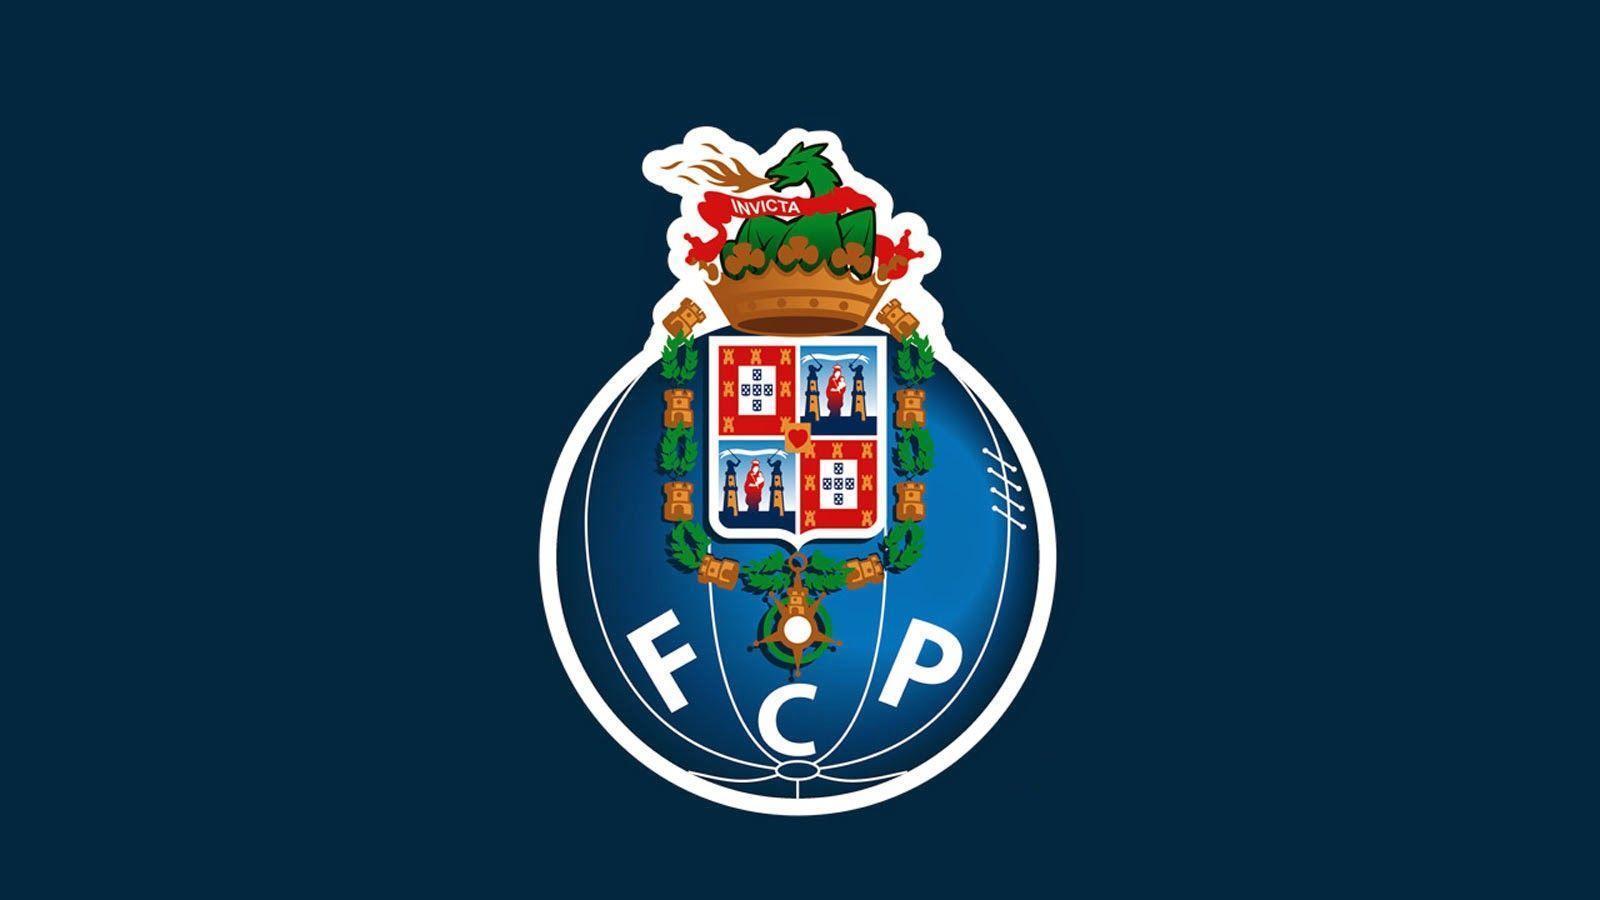 General 1600x900 F.C. Porto blue background logo simple background soccer clubs Portugal